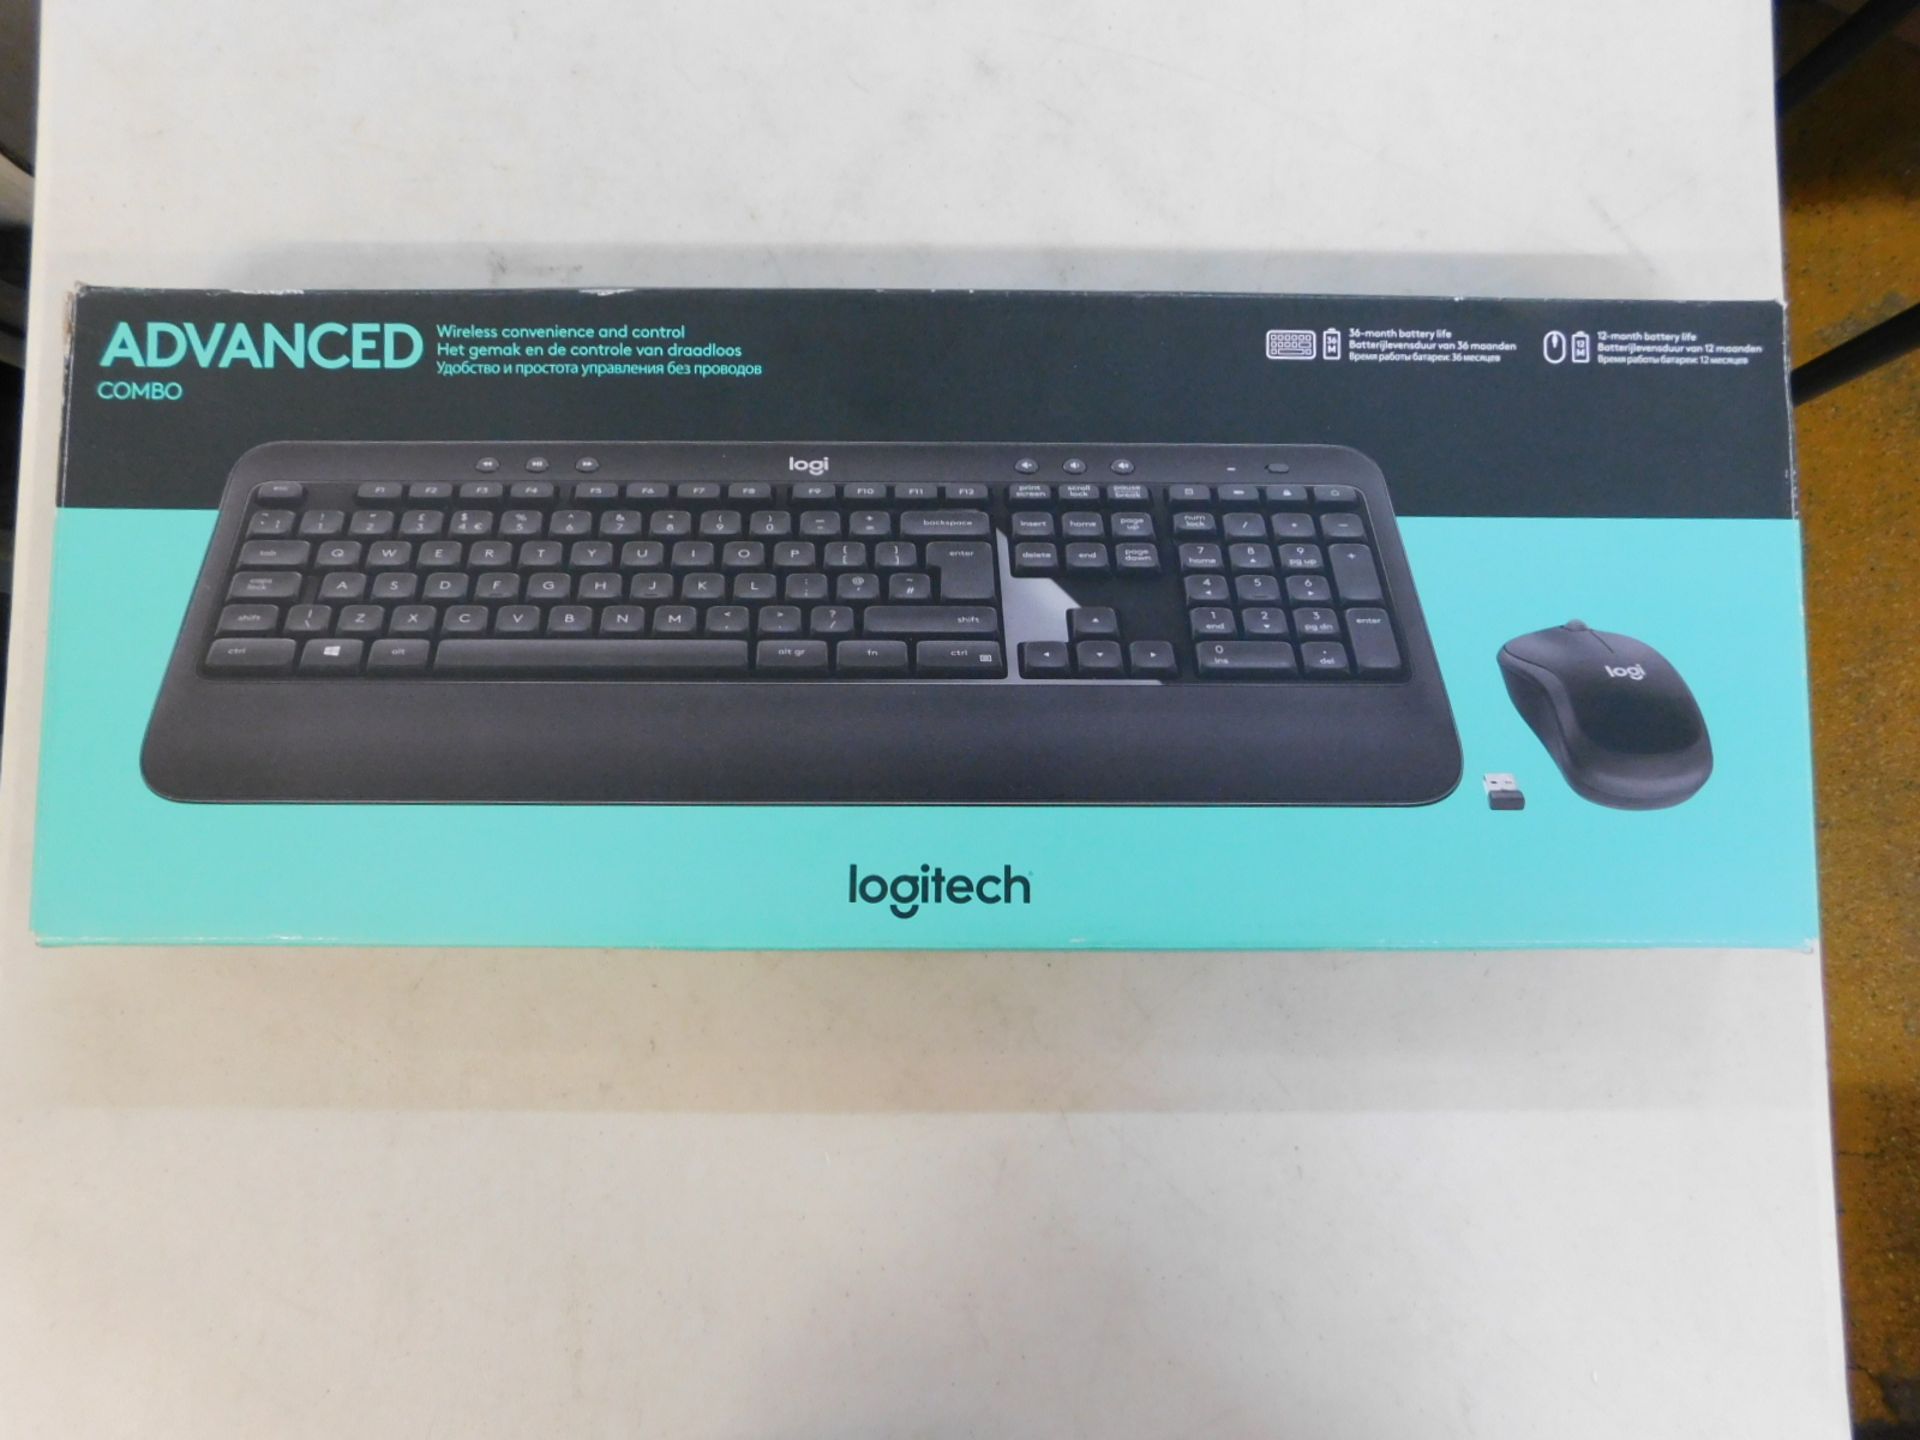 1 BOXED LOGITECH ADVANCED COMBO WIRELESS KEYBOARD AND MOUSE RRP Â£39.99